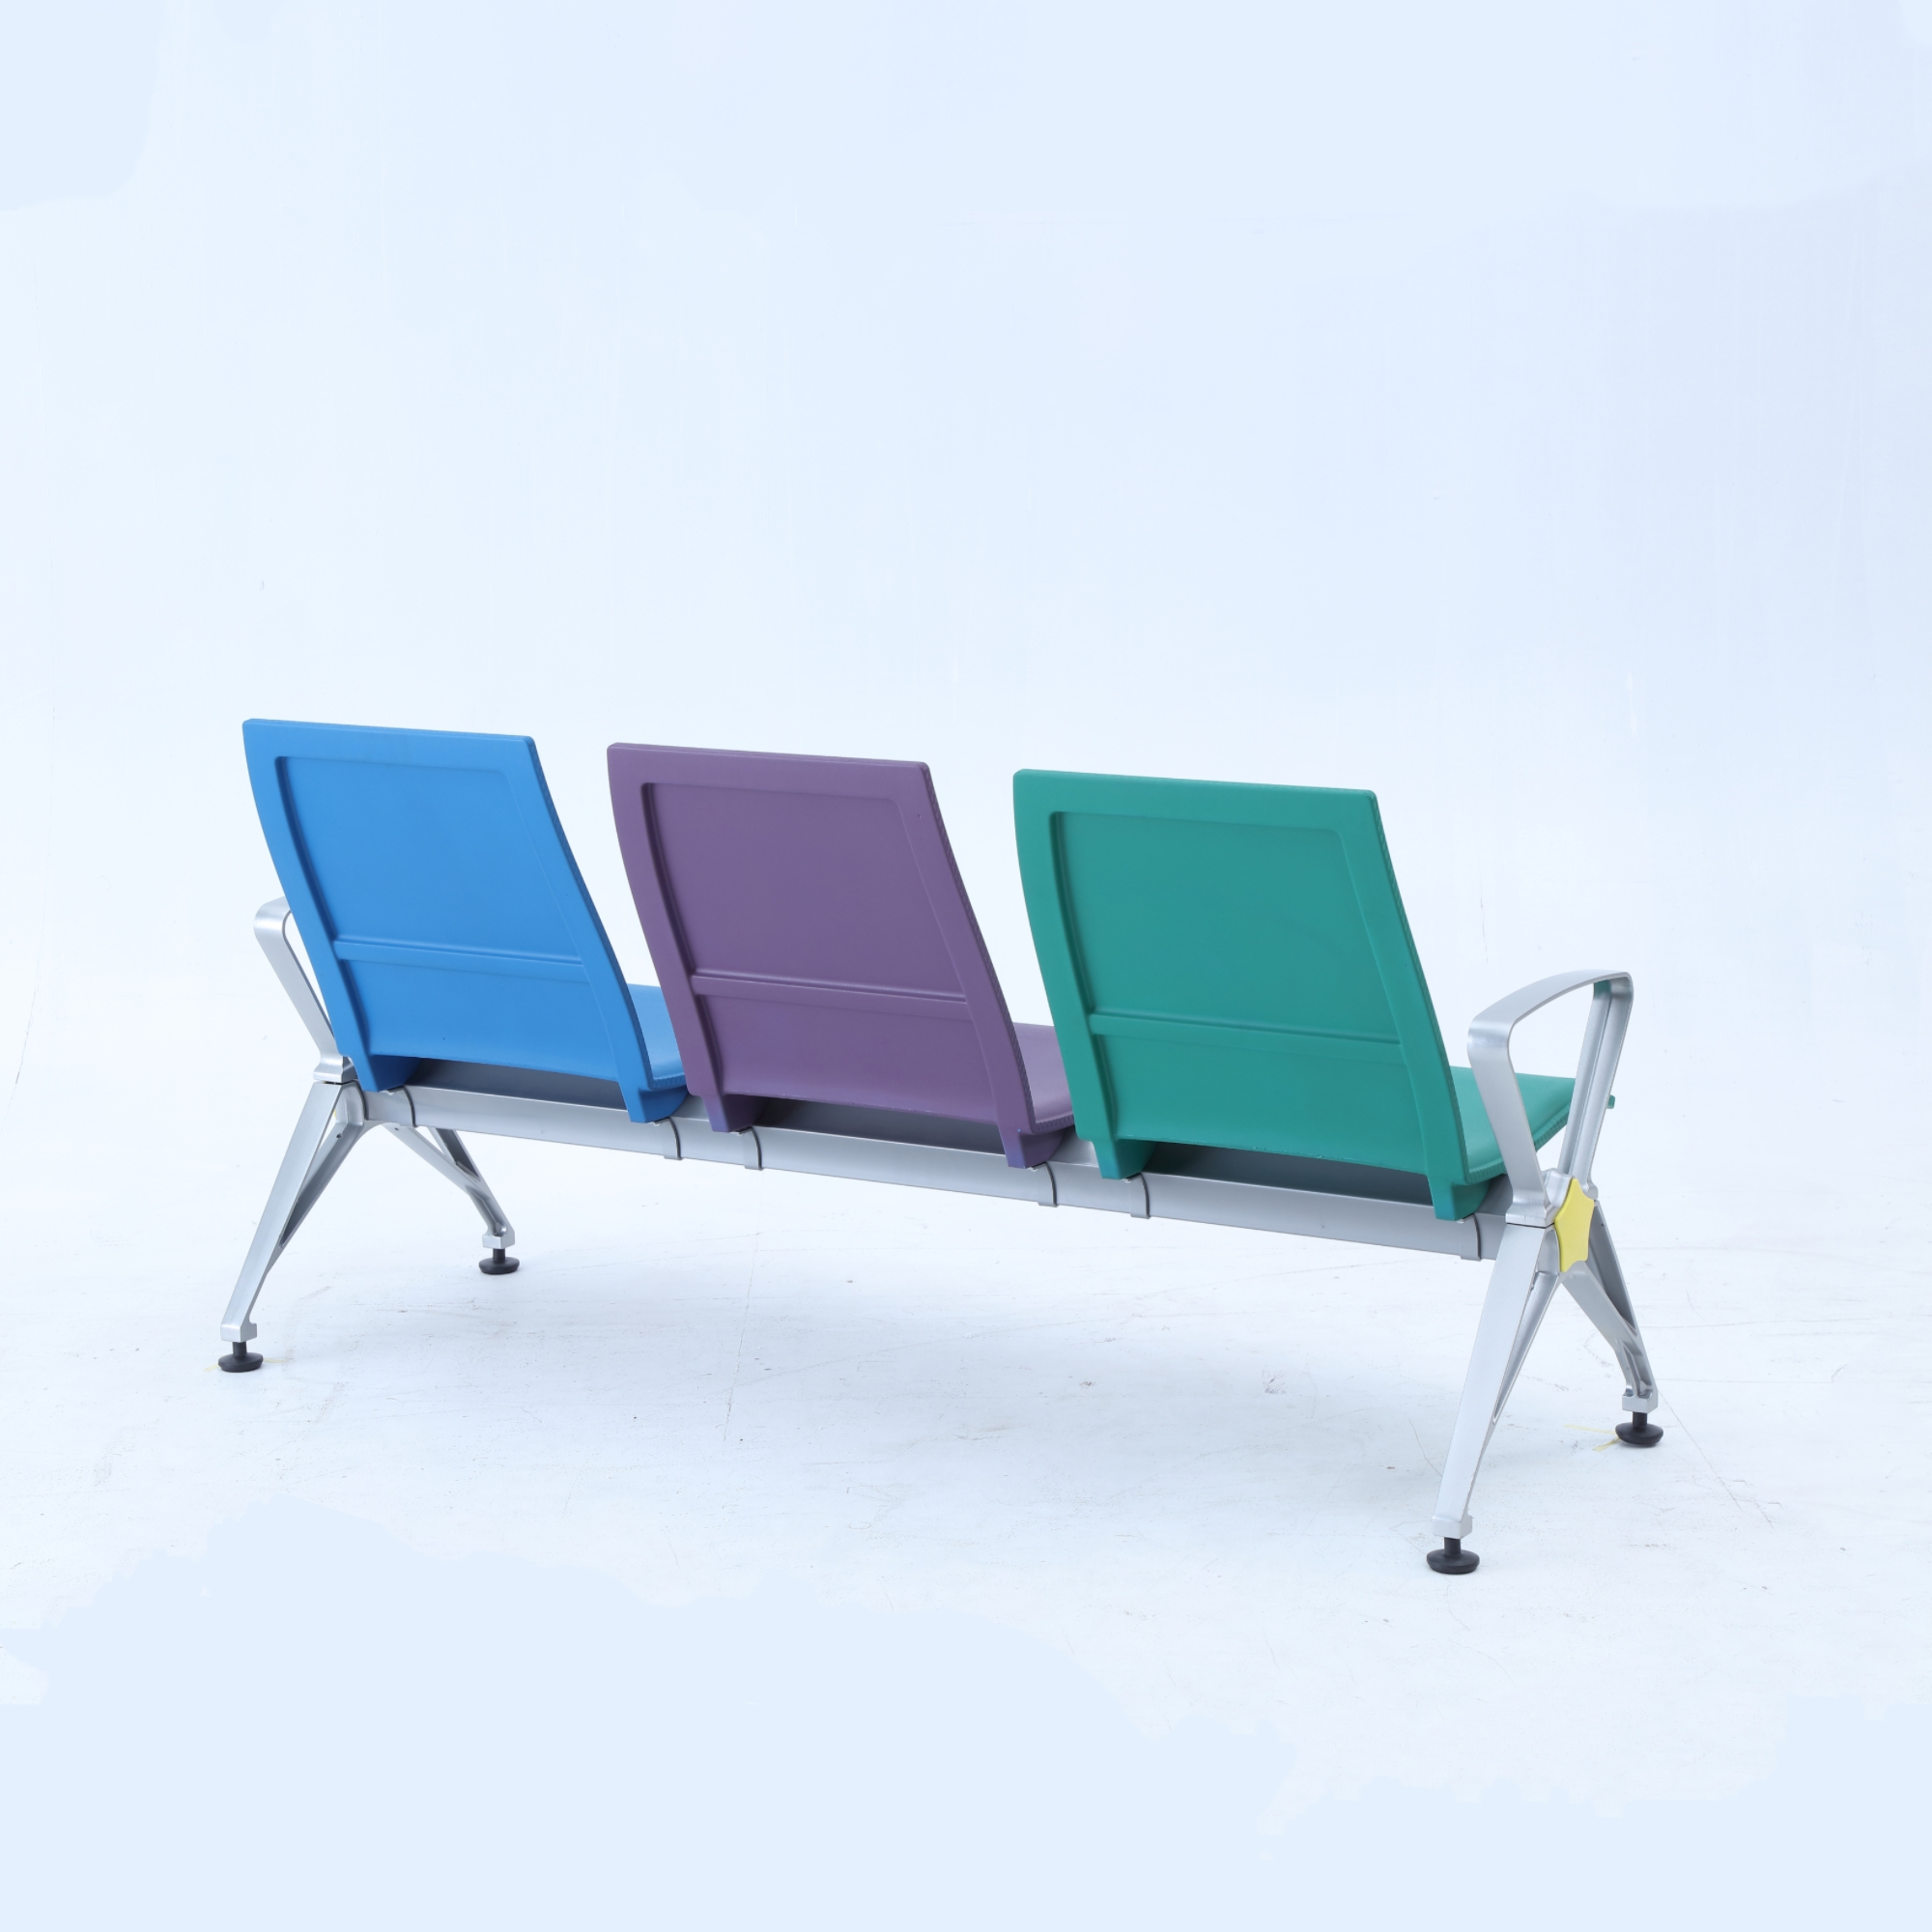 Factory Airport Waiting Chair Steel PU Leather Cushion Three Seats Tandem Bench Hospital 3 Seater Waiting Chair